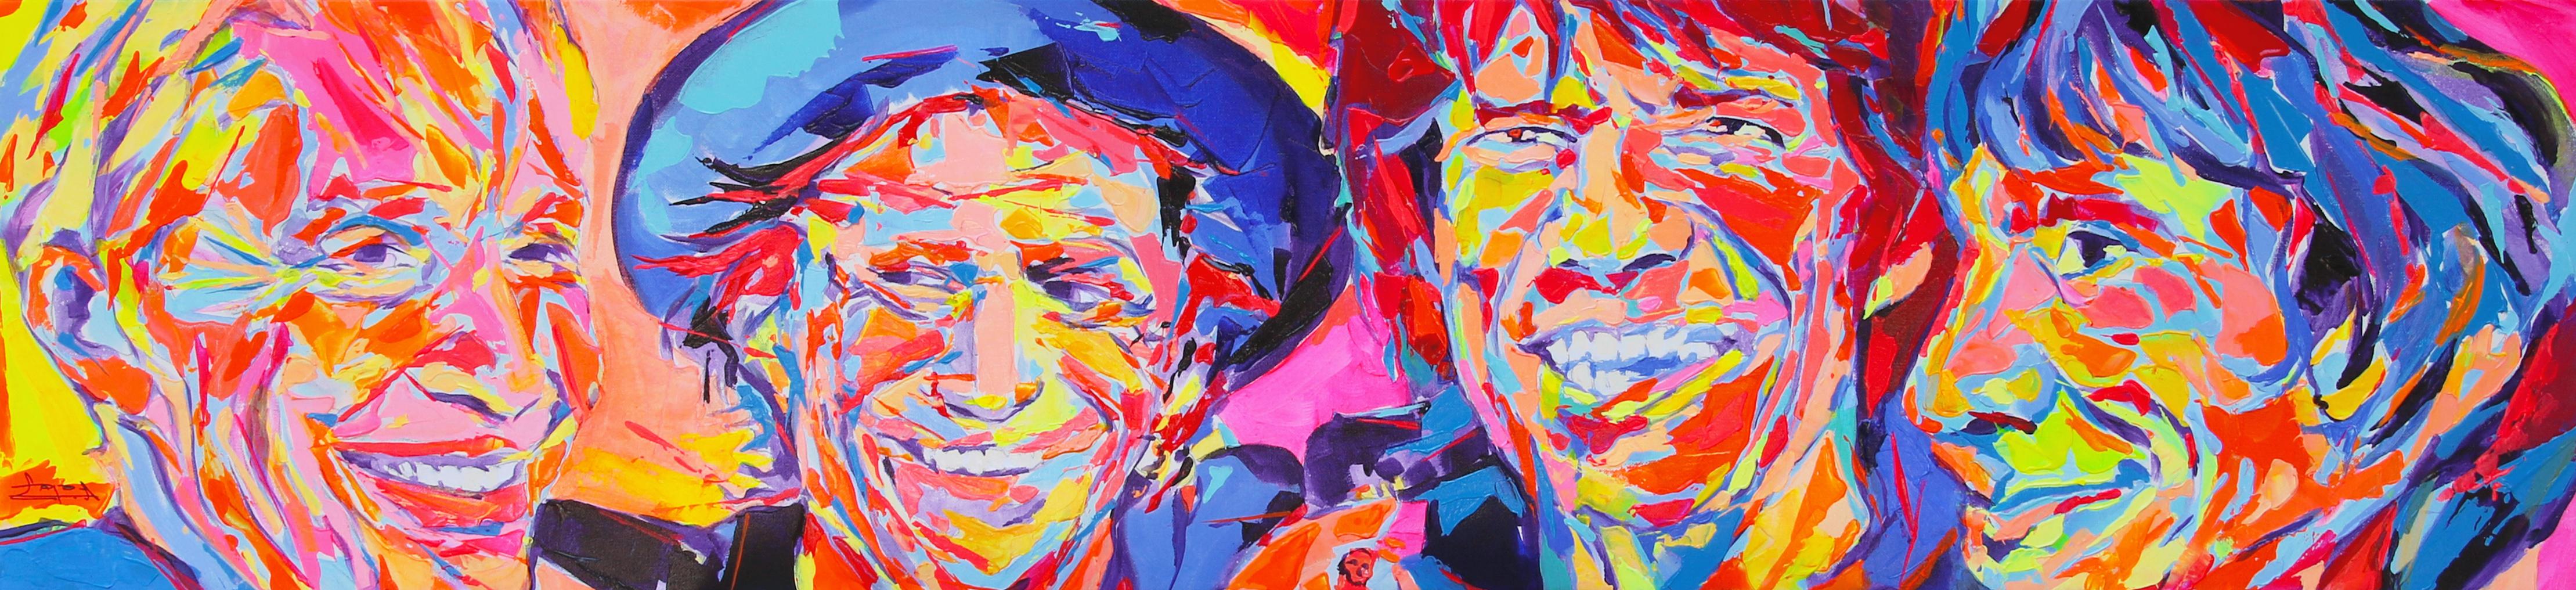 Federico Lopez Abstract Painting - Rolling Stones